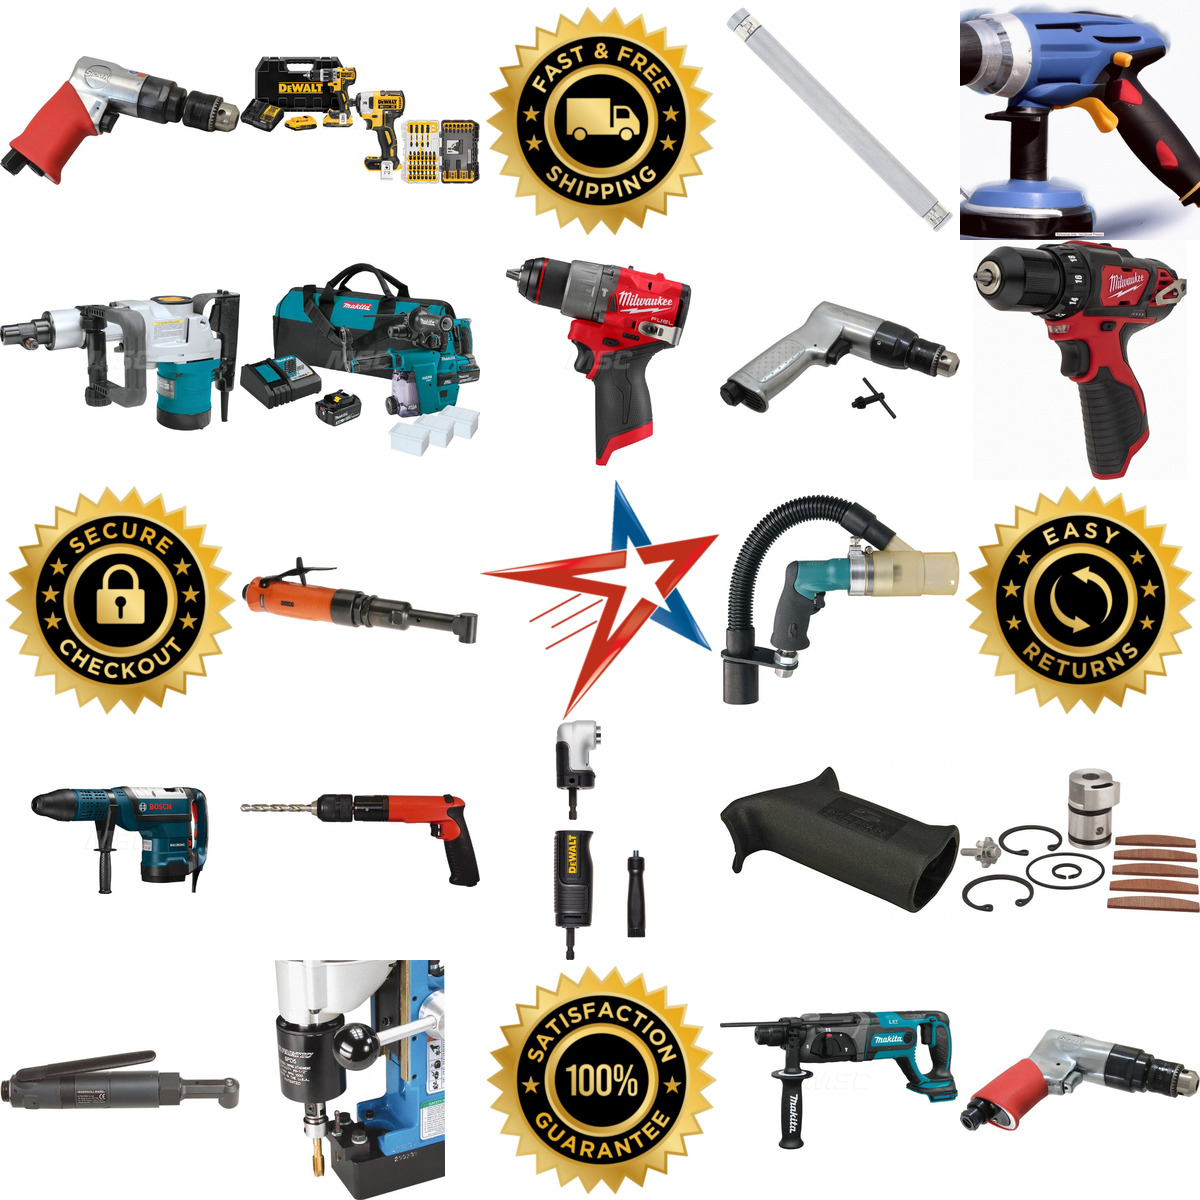 A selection of Power Drills products on GoVets